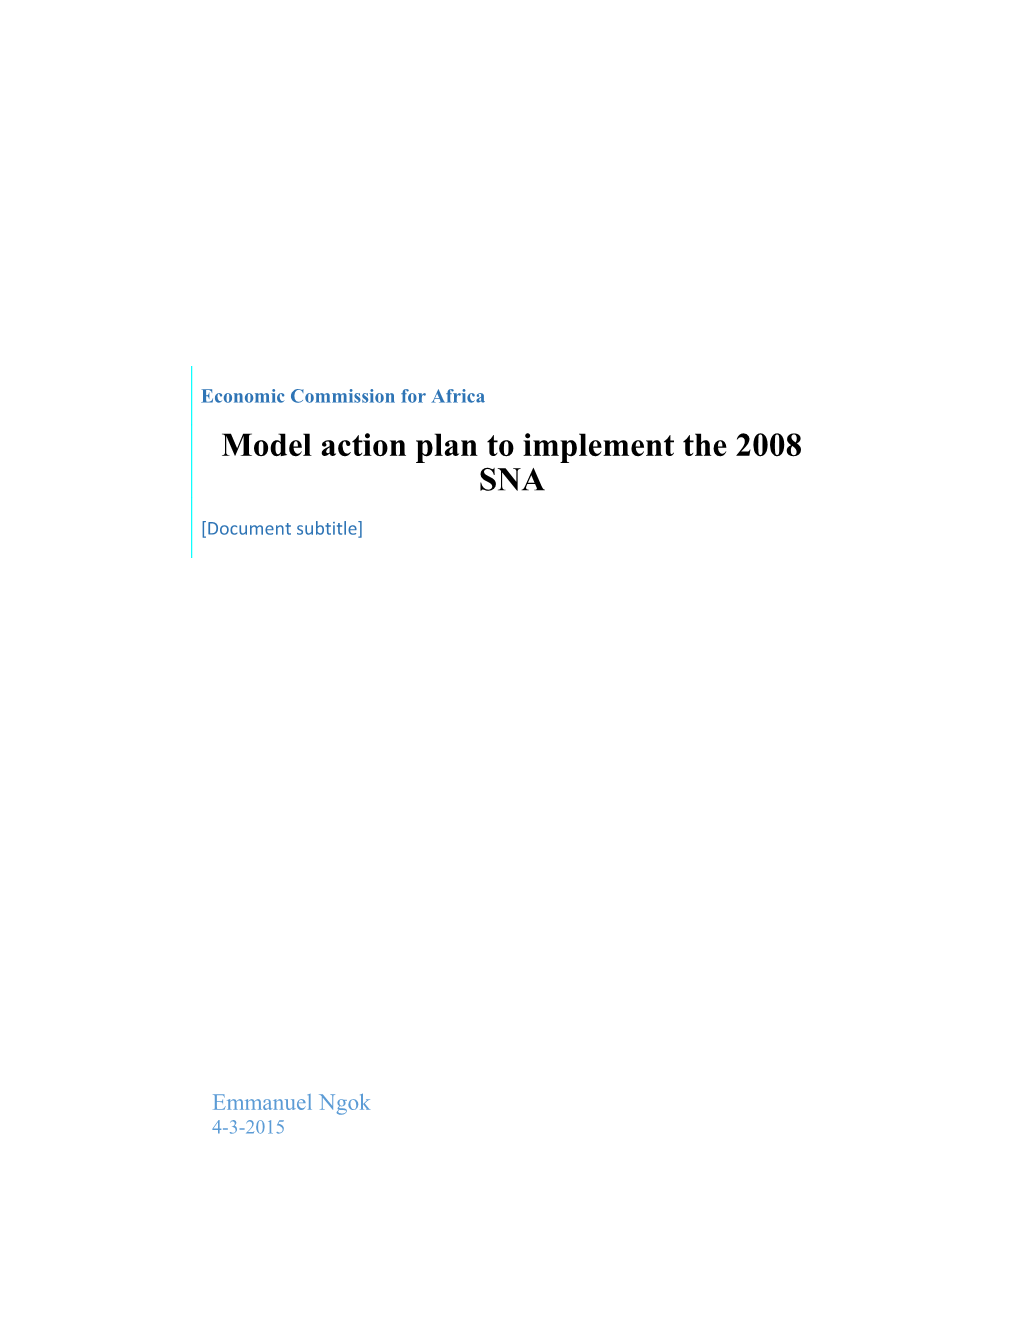 Model Action Plan to Implement the 2008 SNA